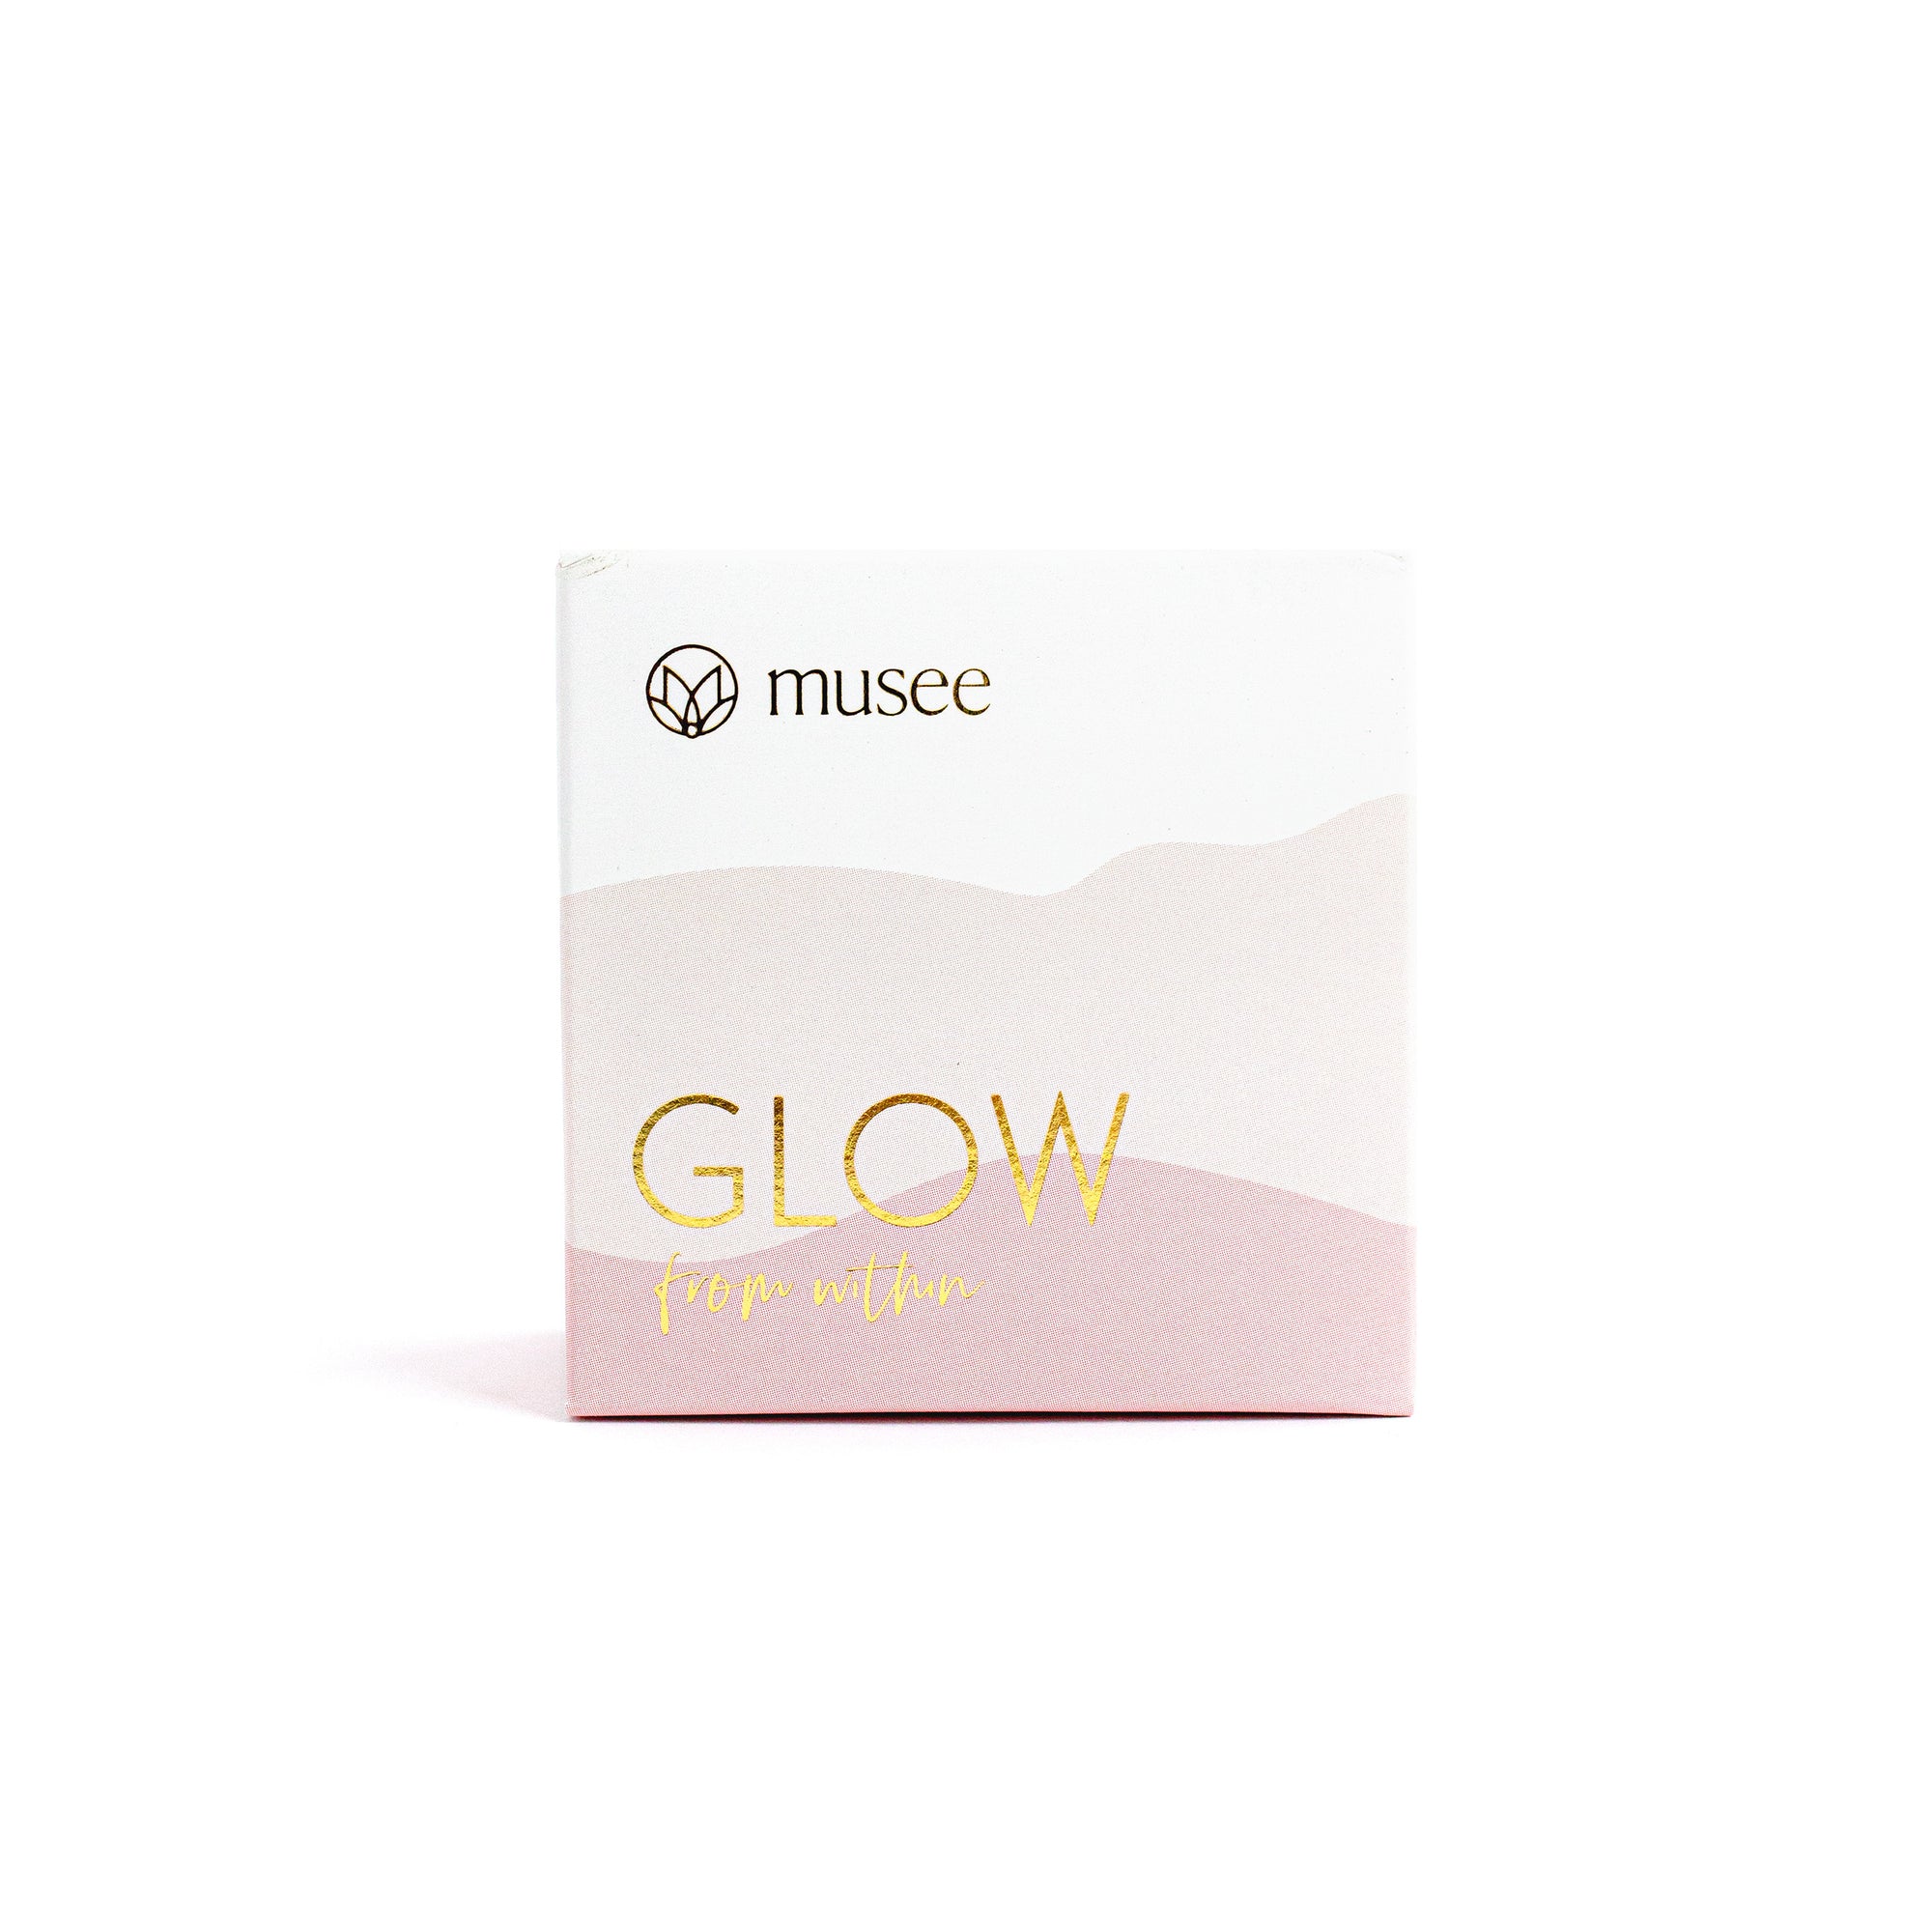 Glow from Within Soap